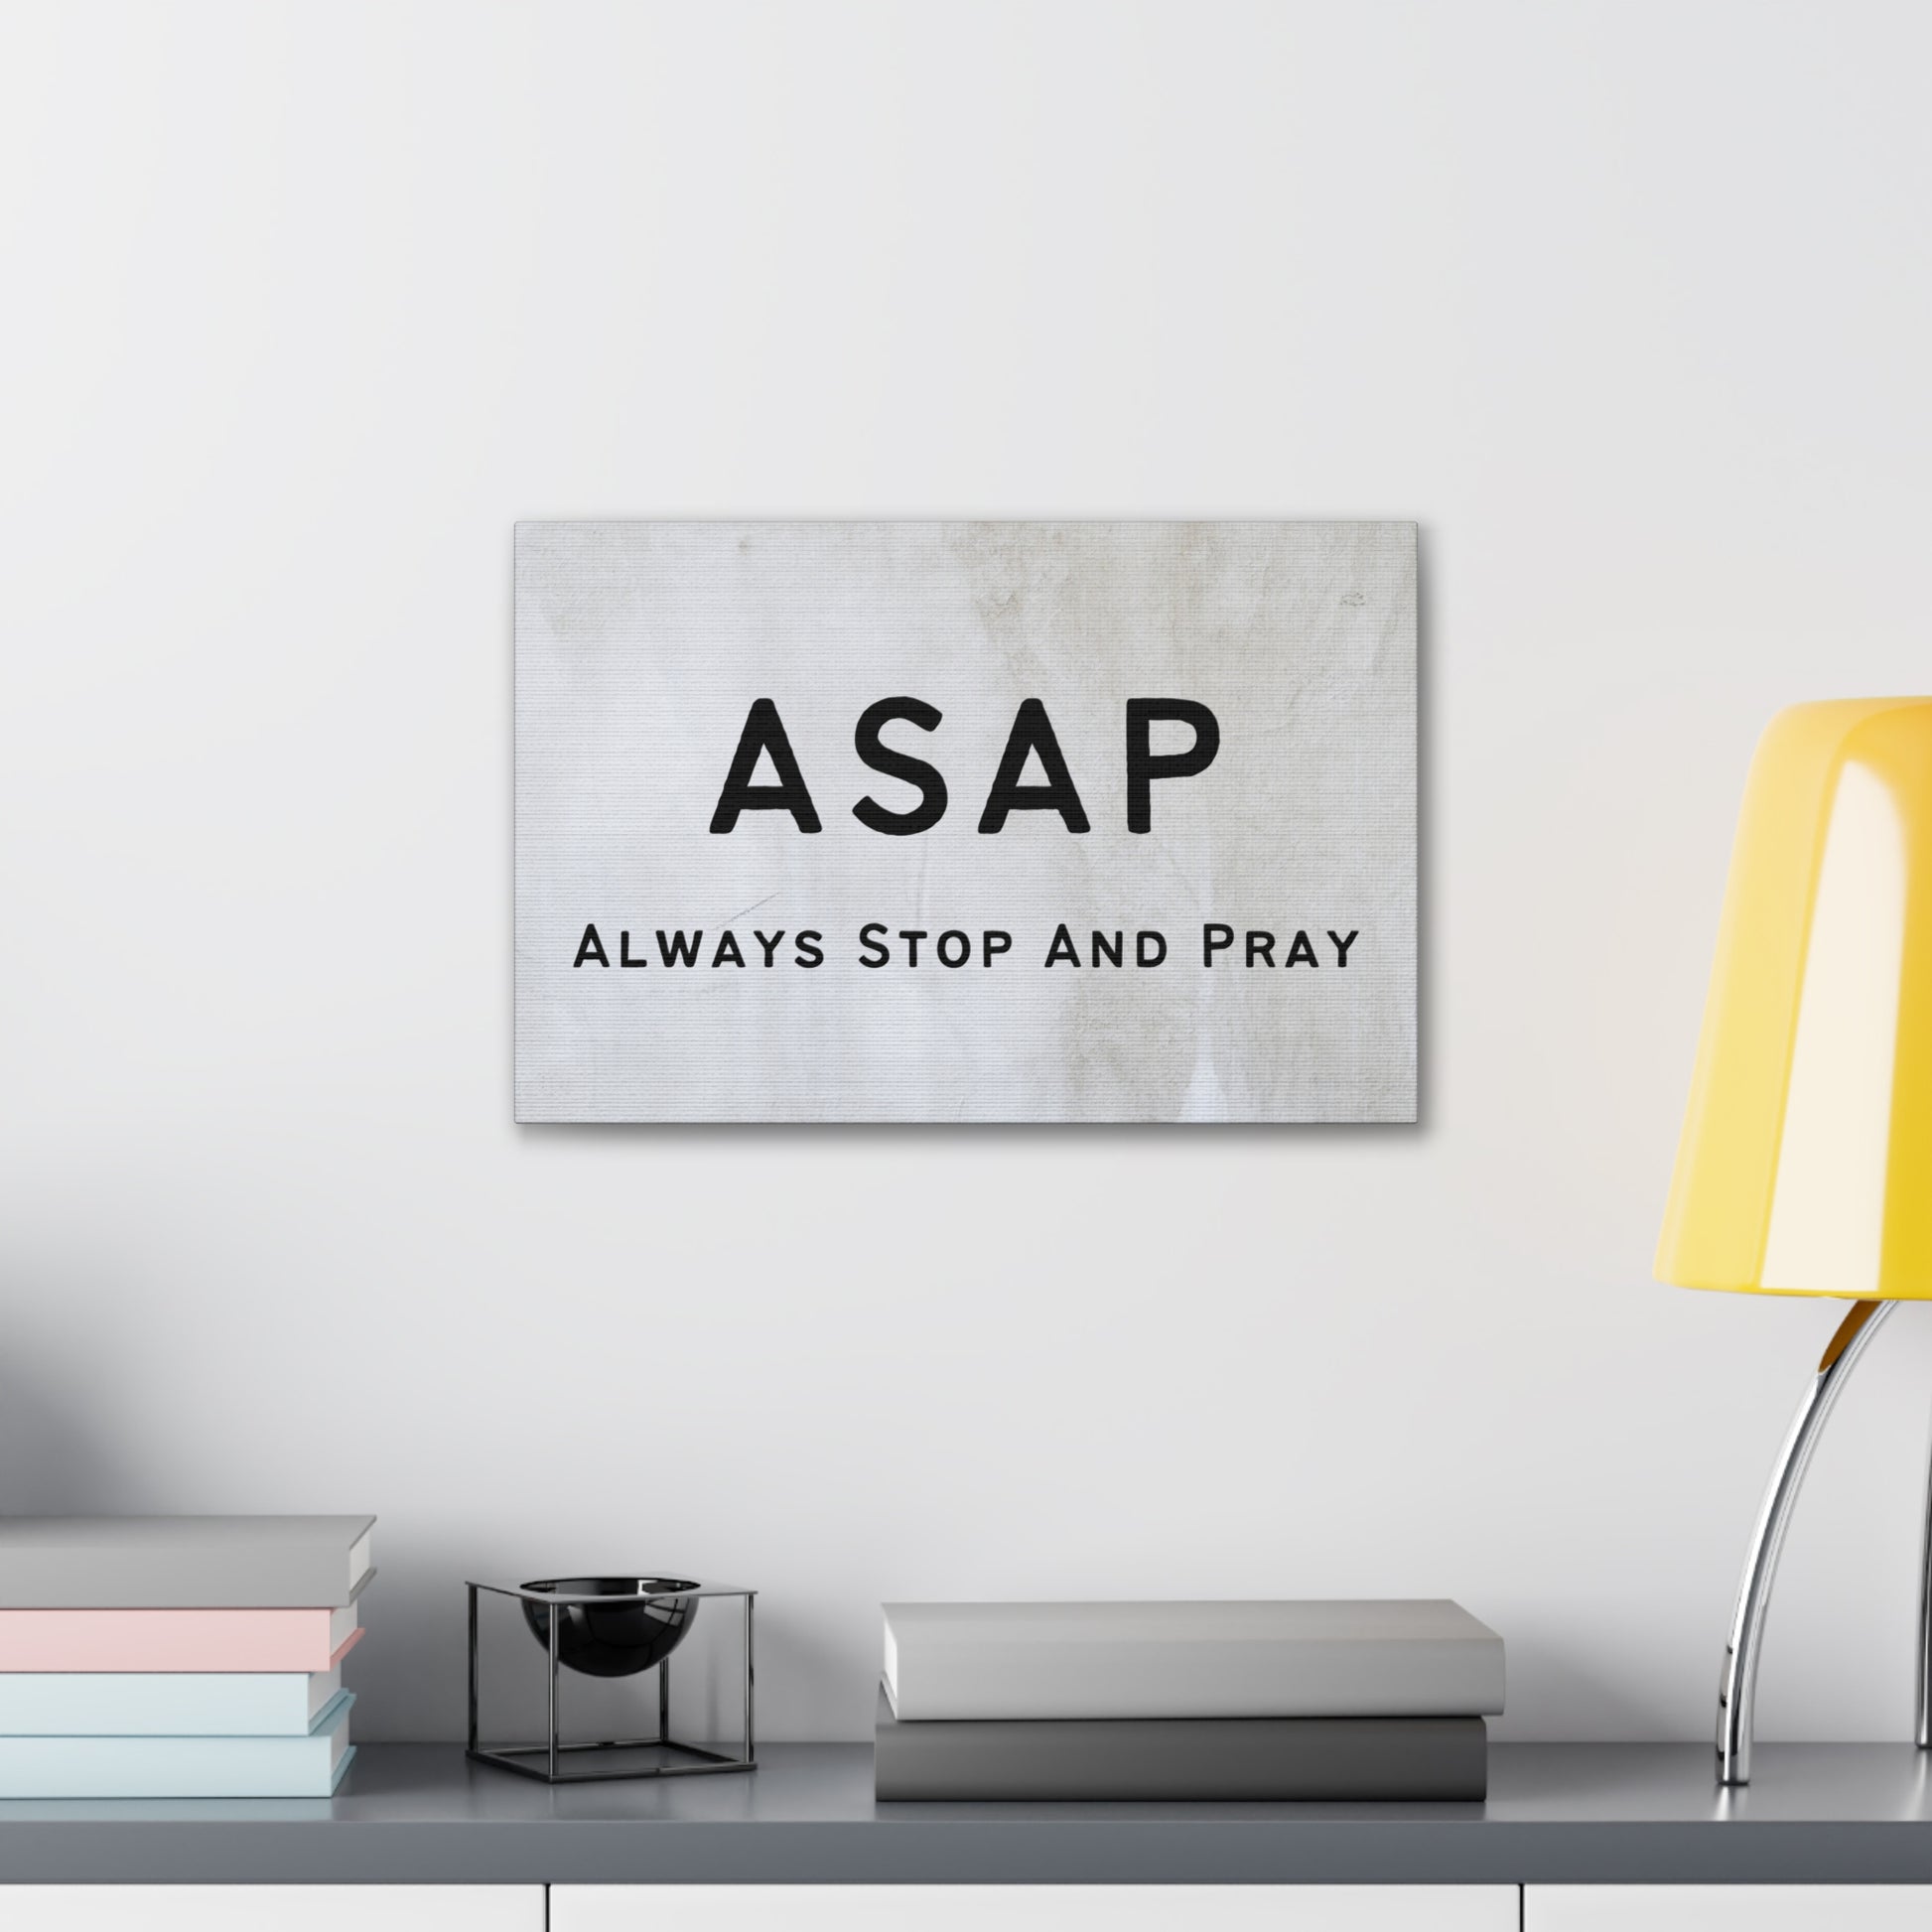 "ASAP Always Stop And Pray" Wall Art - Weave Got Gifts - Unique Gifts You Won’t Find Anywhere Else!